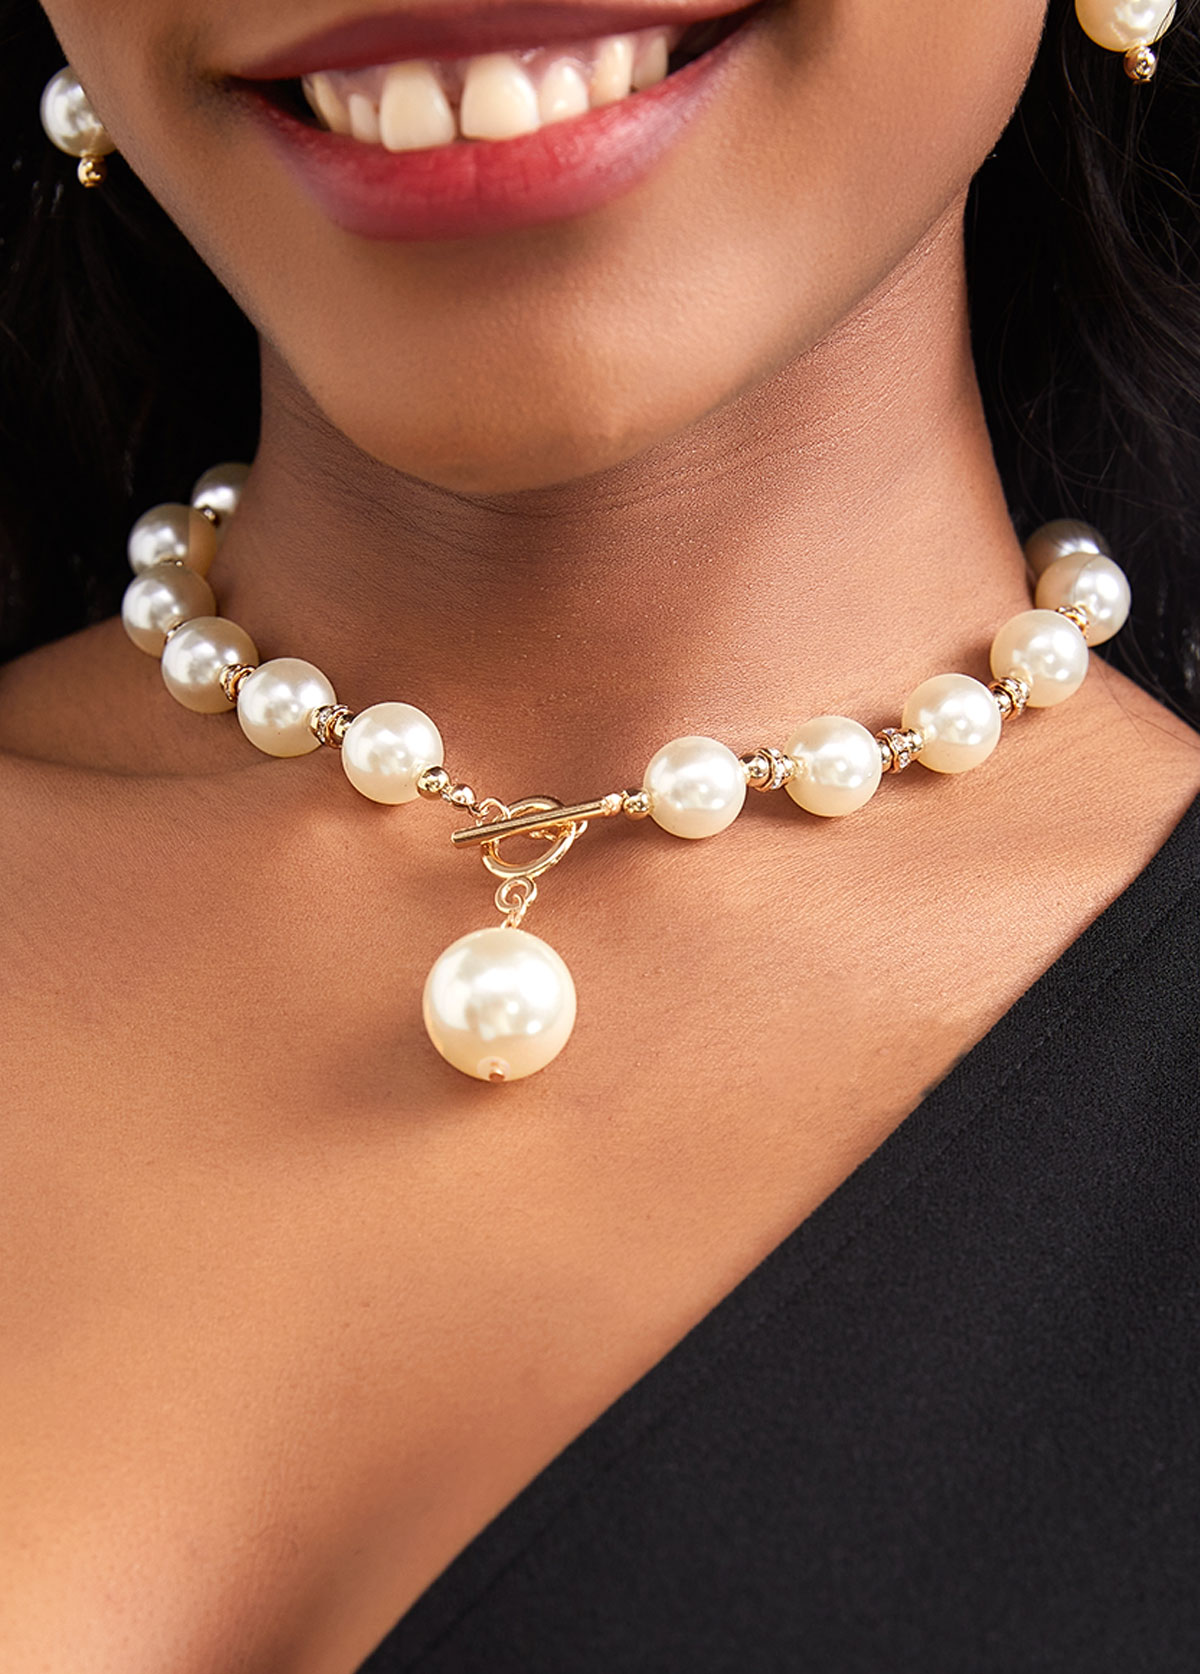 Silvery White Round Pearl Earings and Necklace